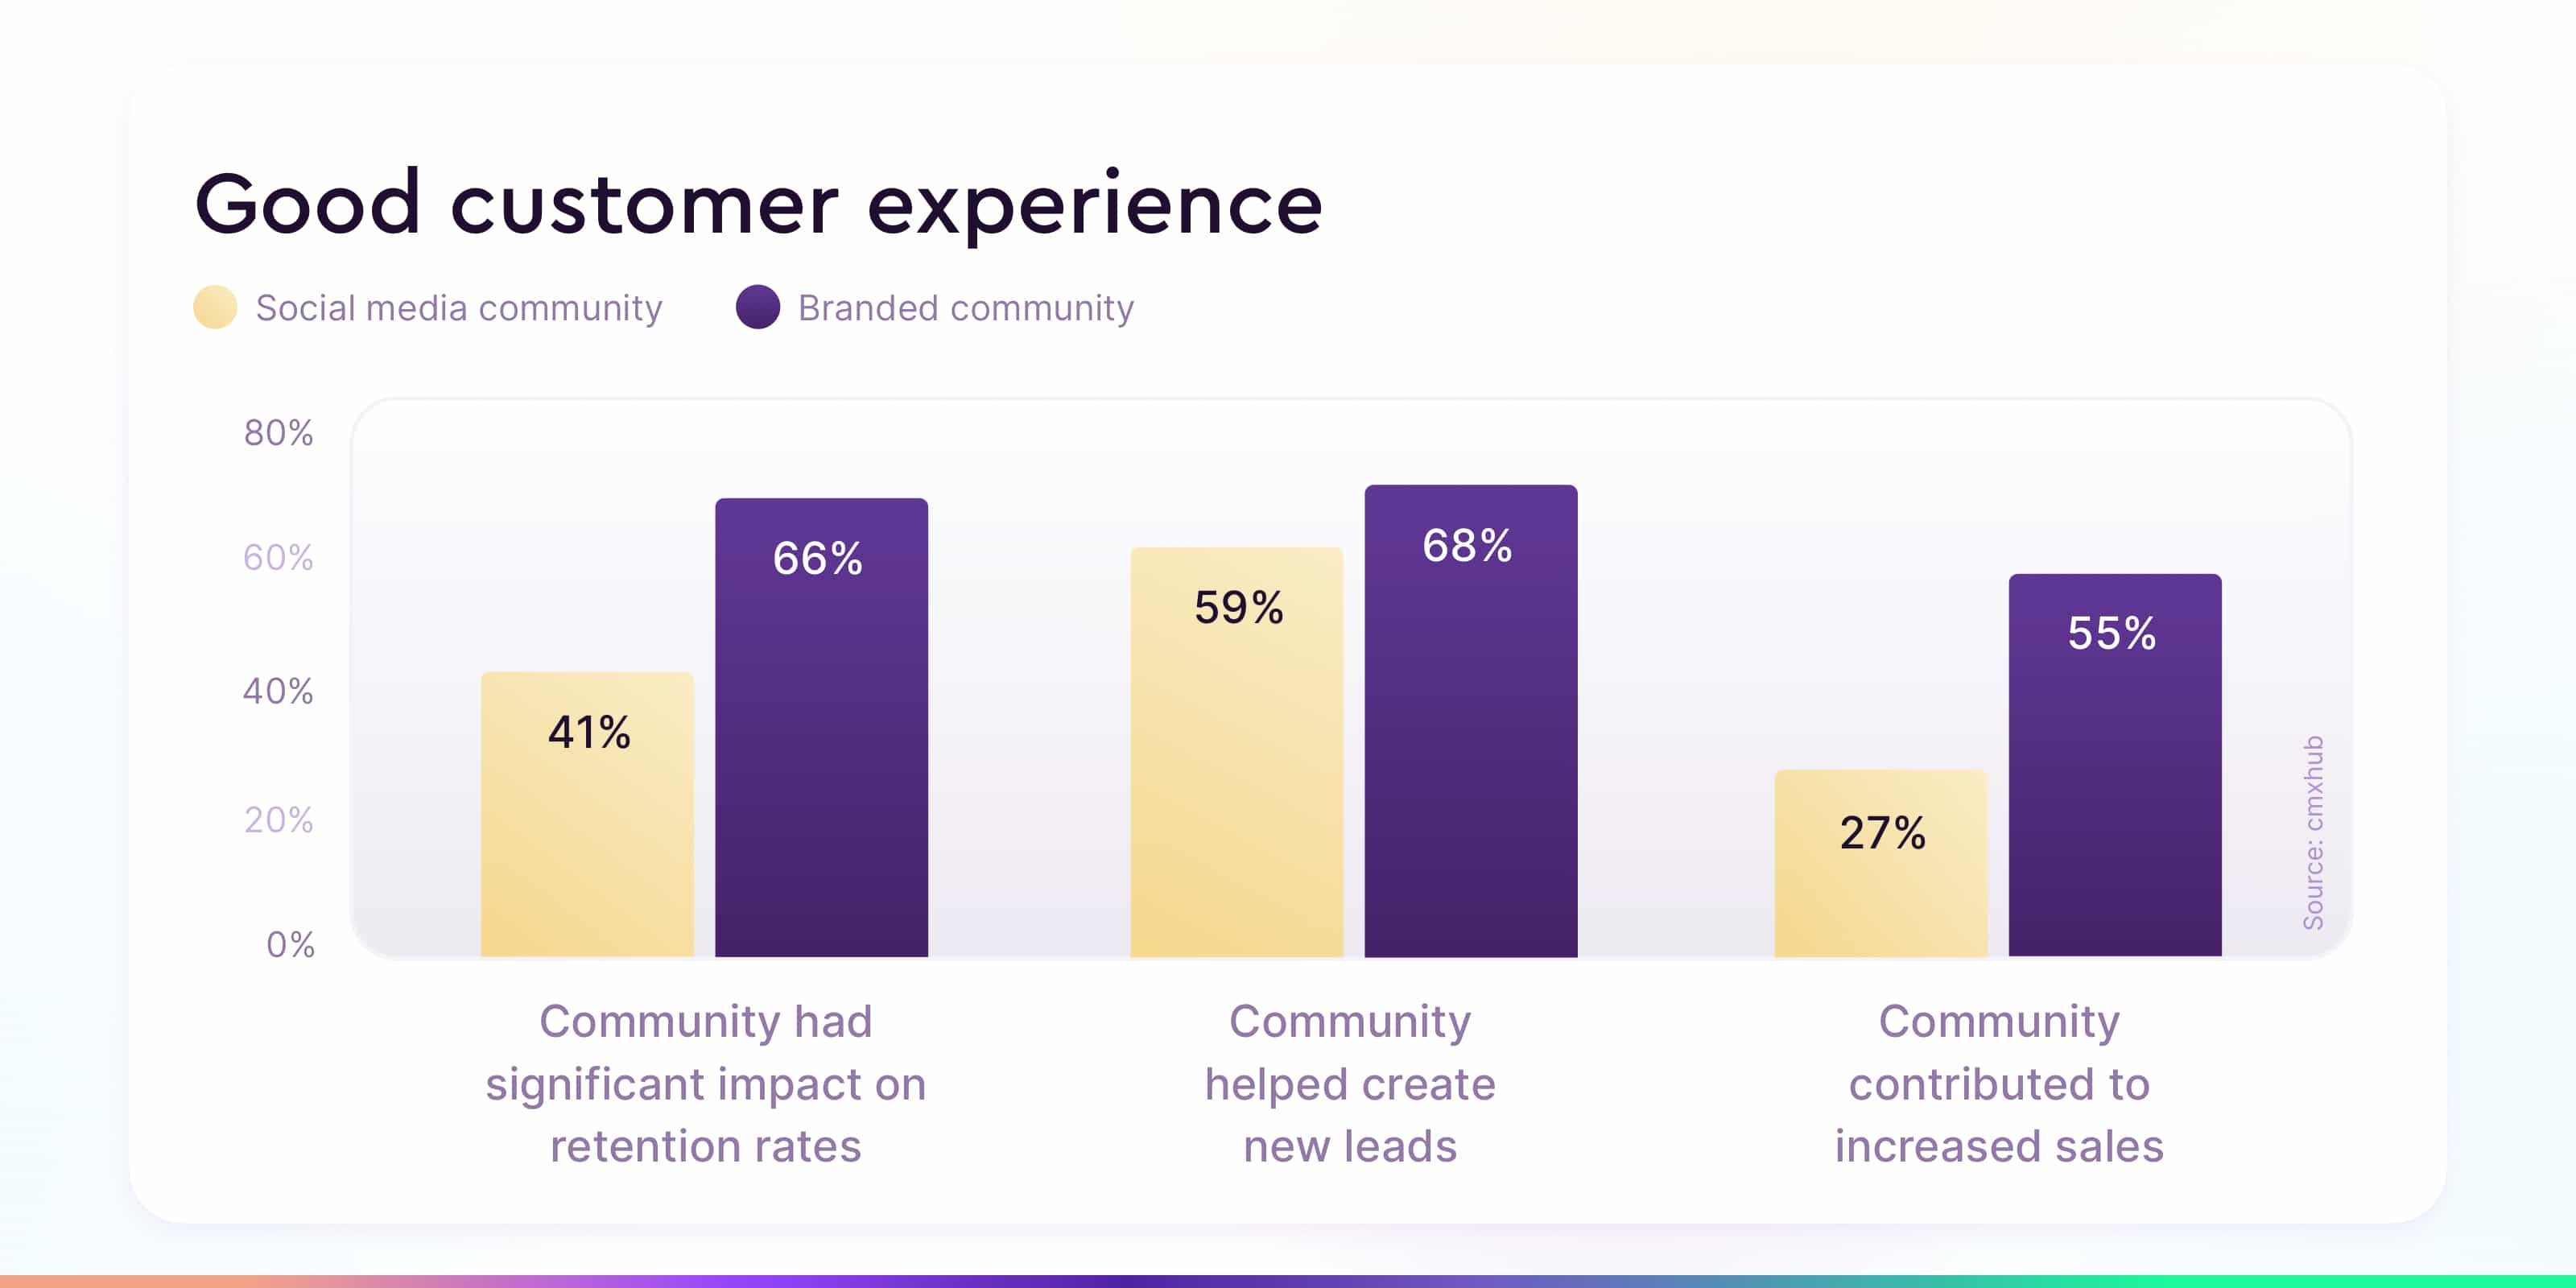 How does a brand community affect the customer experience compared to a social media community?